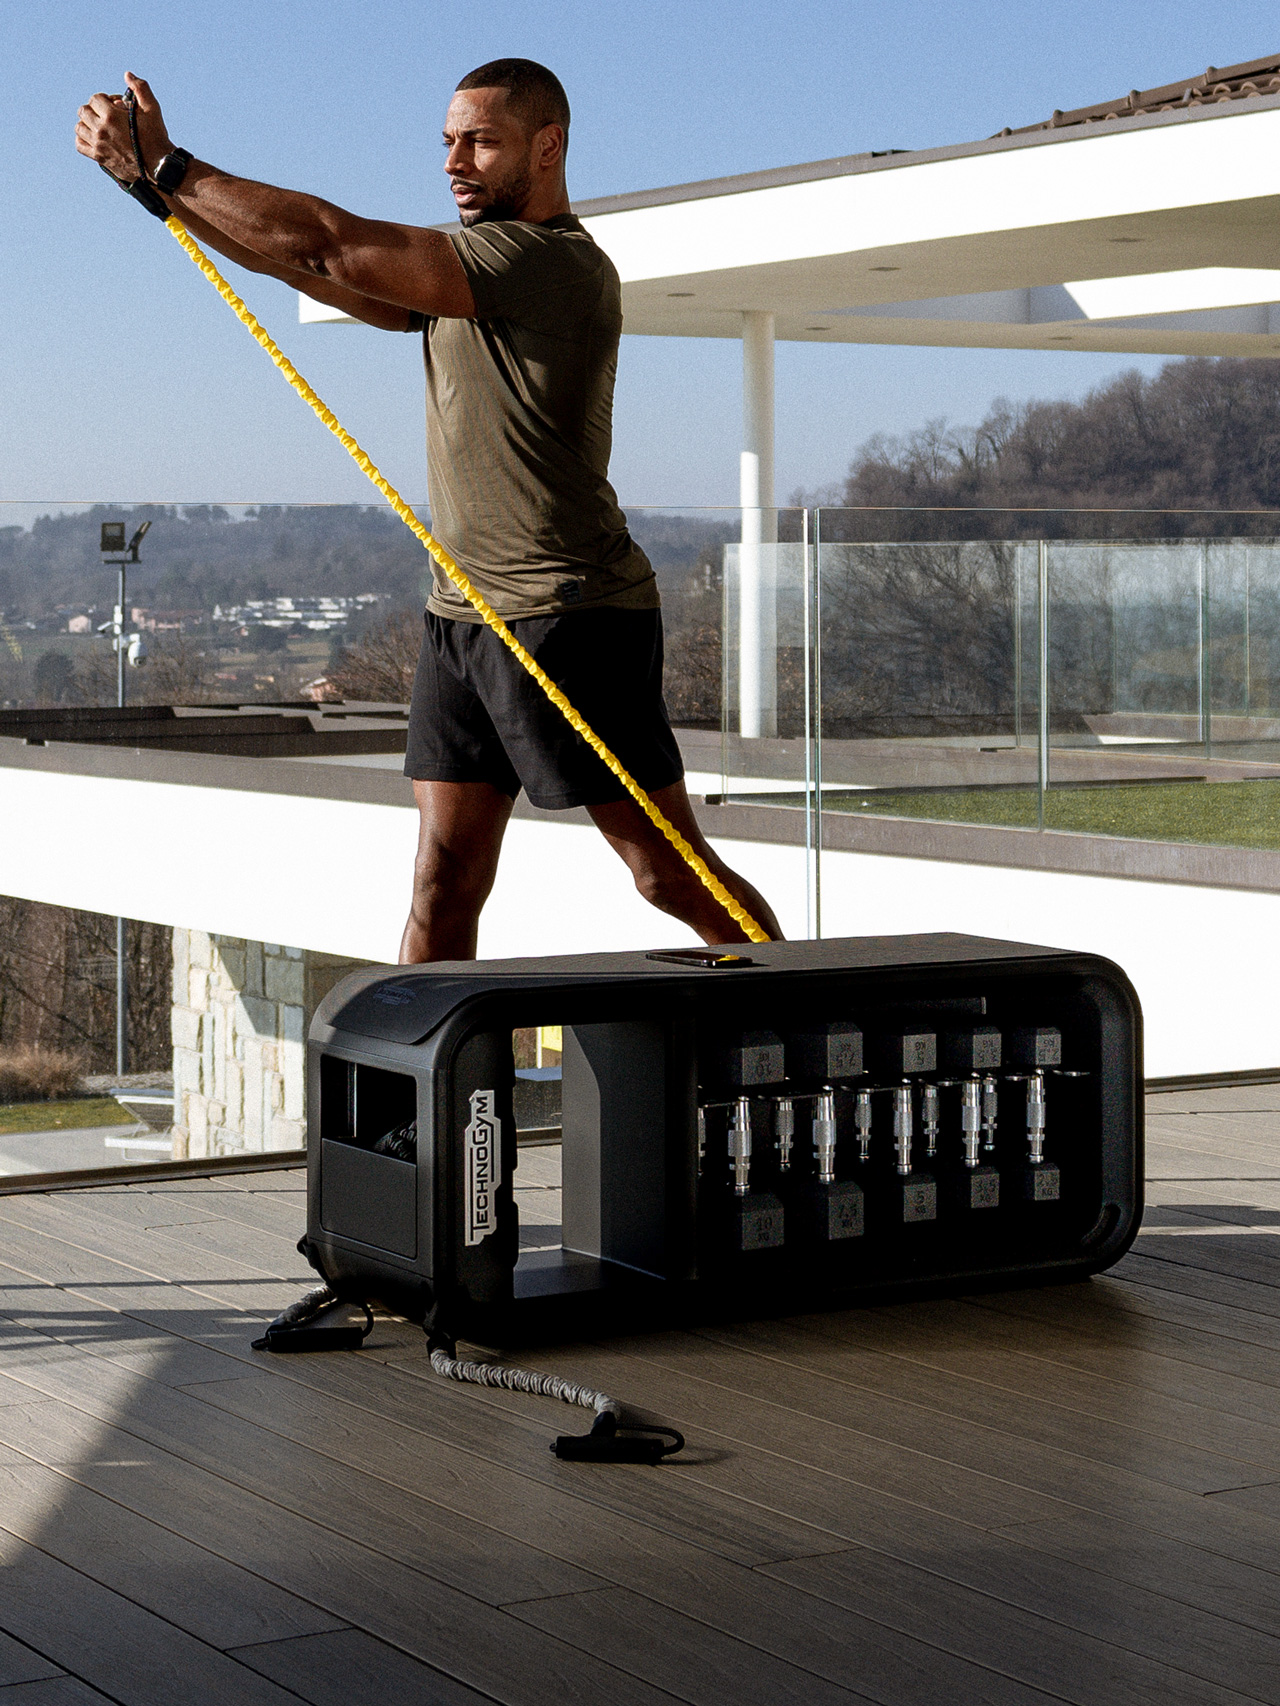 Technogym bench: the home workout bench